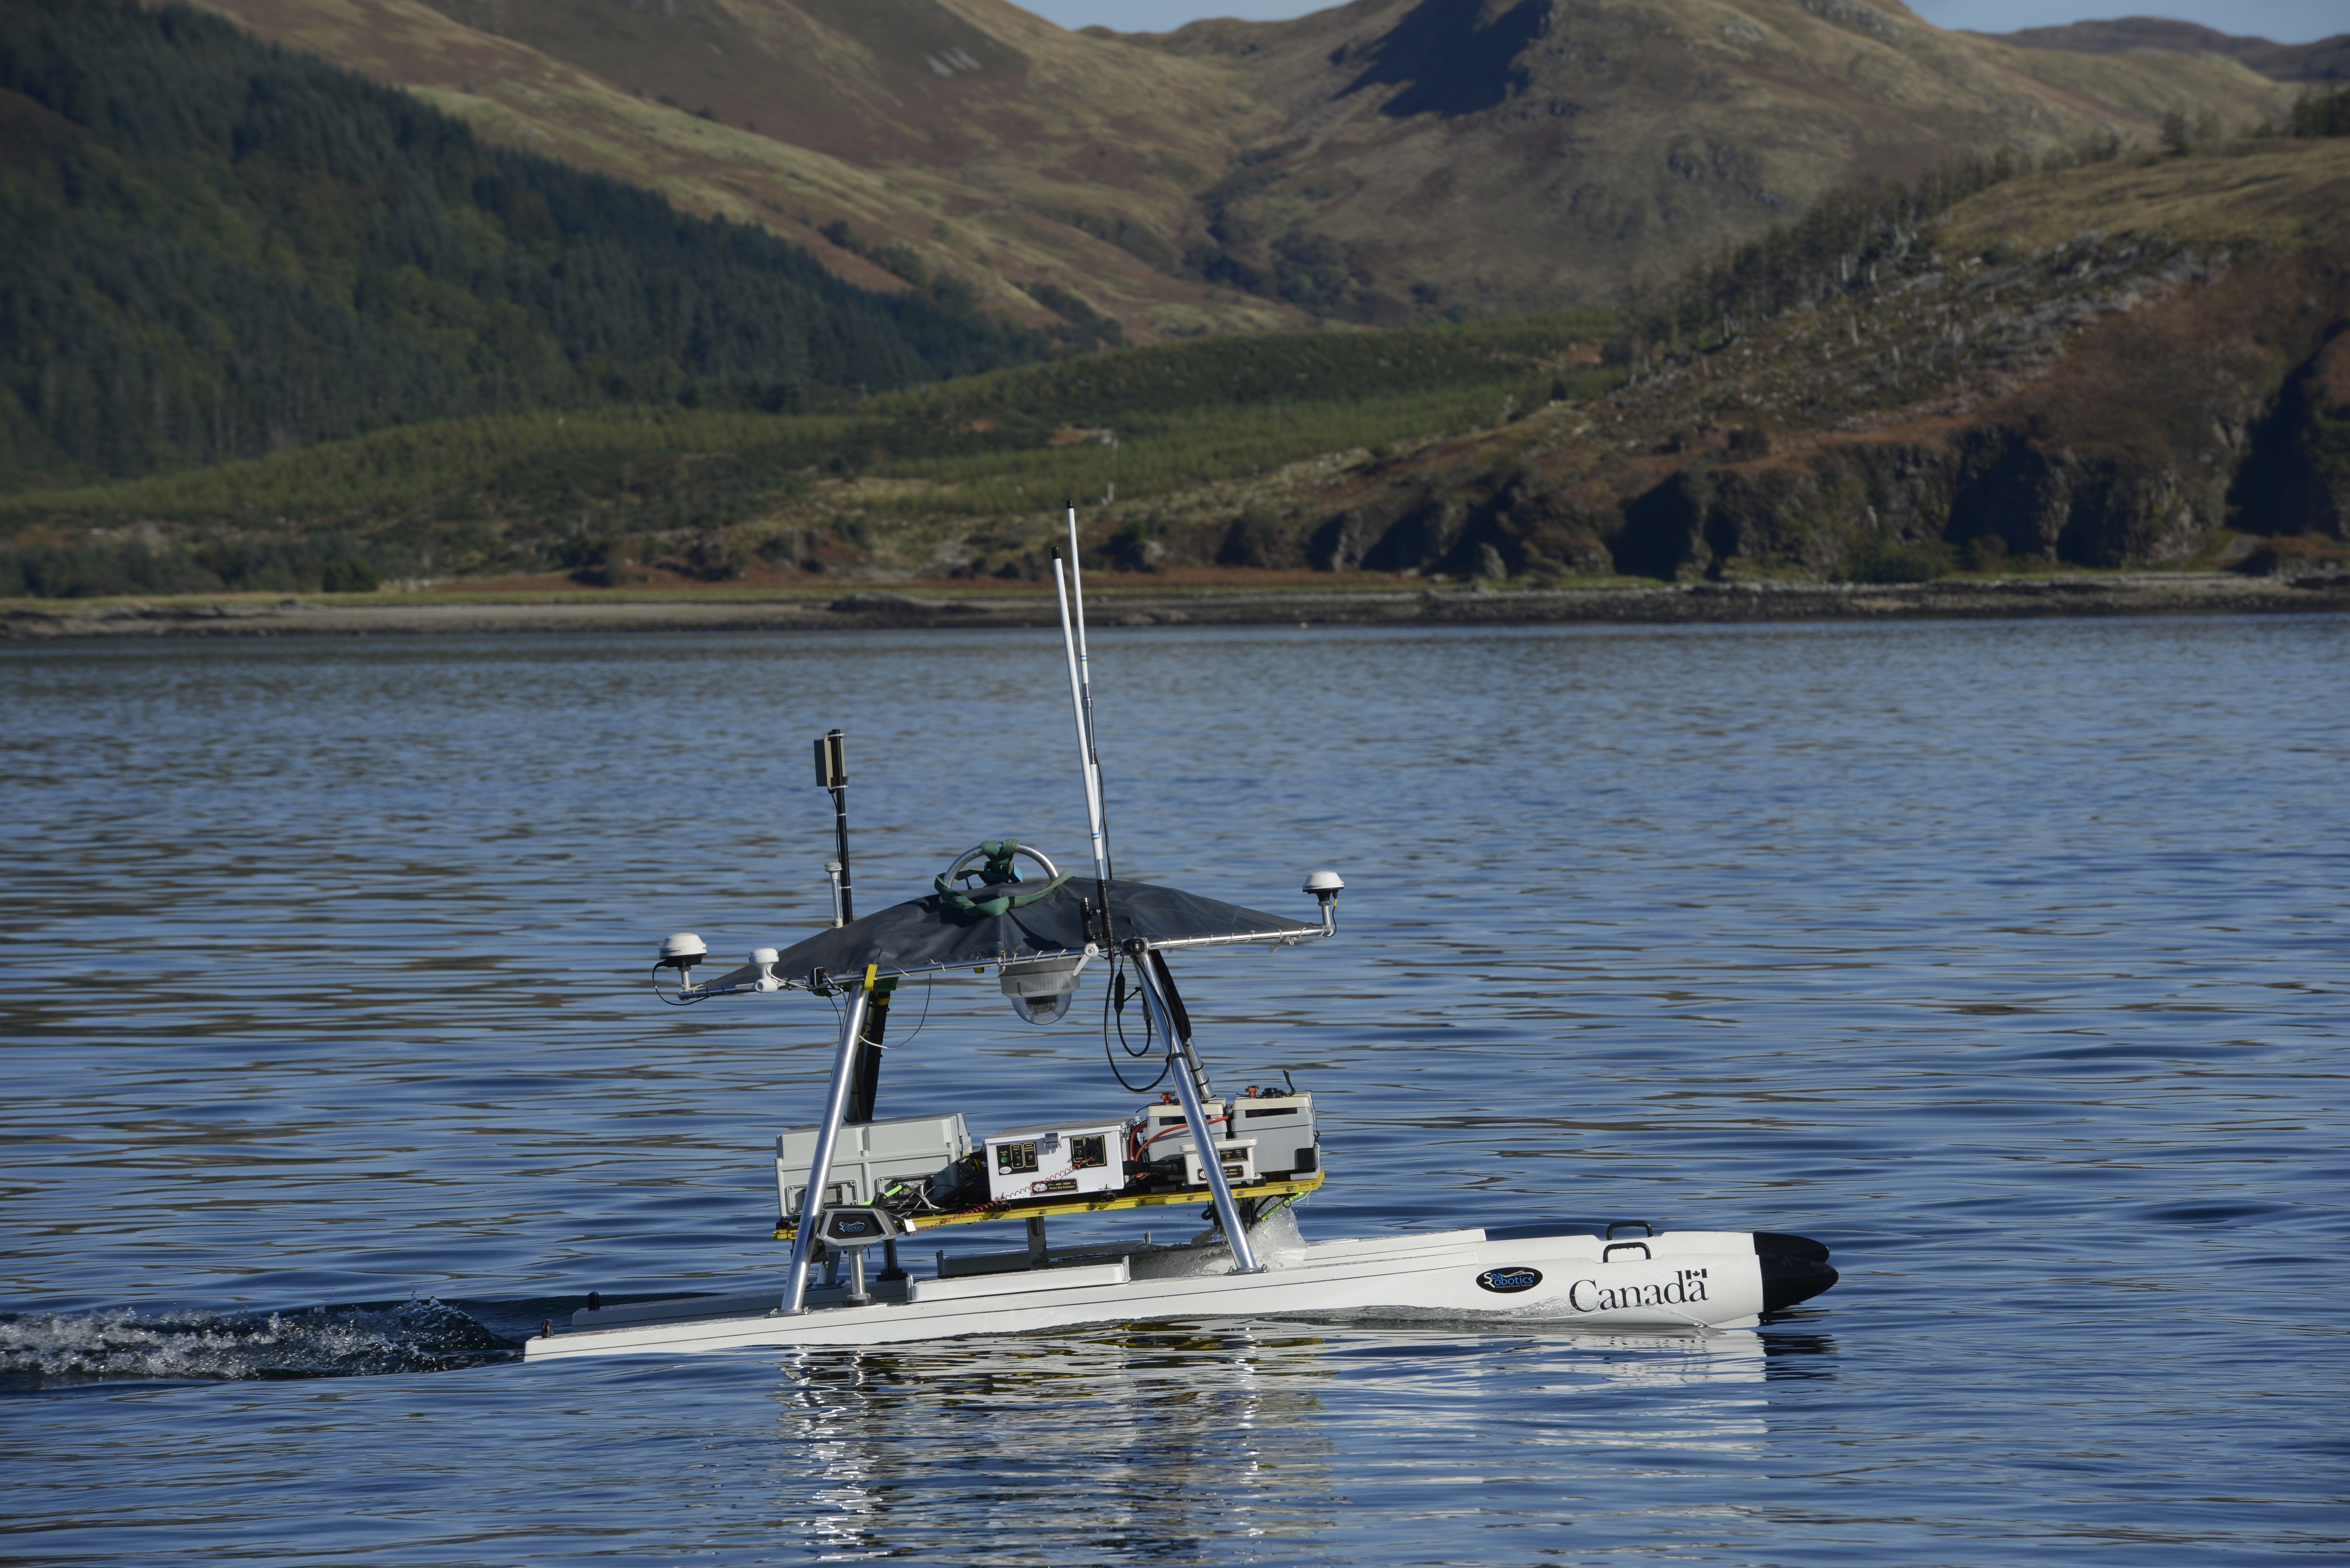 Defence Research and Development Canada’s unmanned surface vehicle USV-2600 performs an autonomous mission in the water at Loch Alsh. Photo by Janice Lang, DRDC